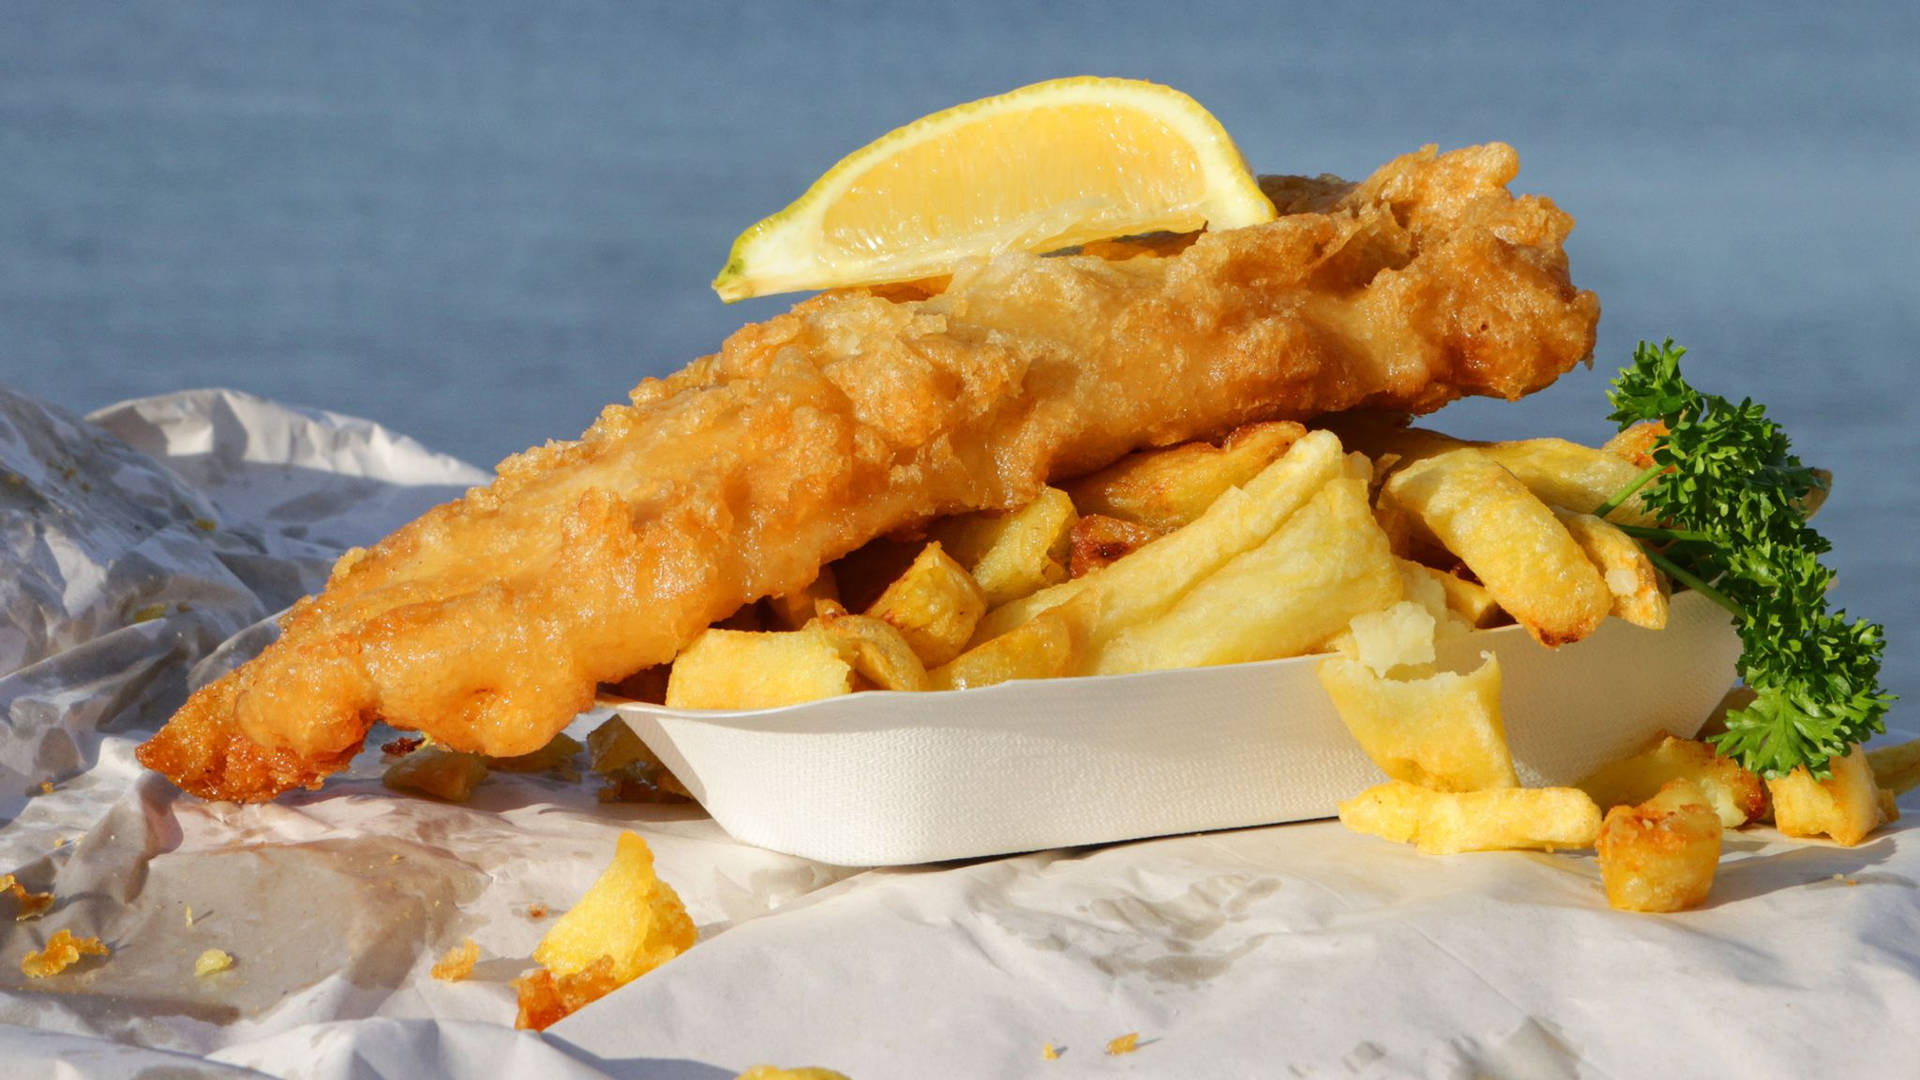 Caption: Delicious Golden-brown Fish and Chips Wallpaper